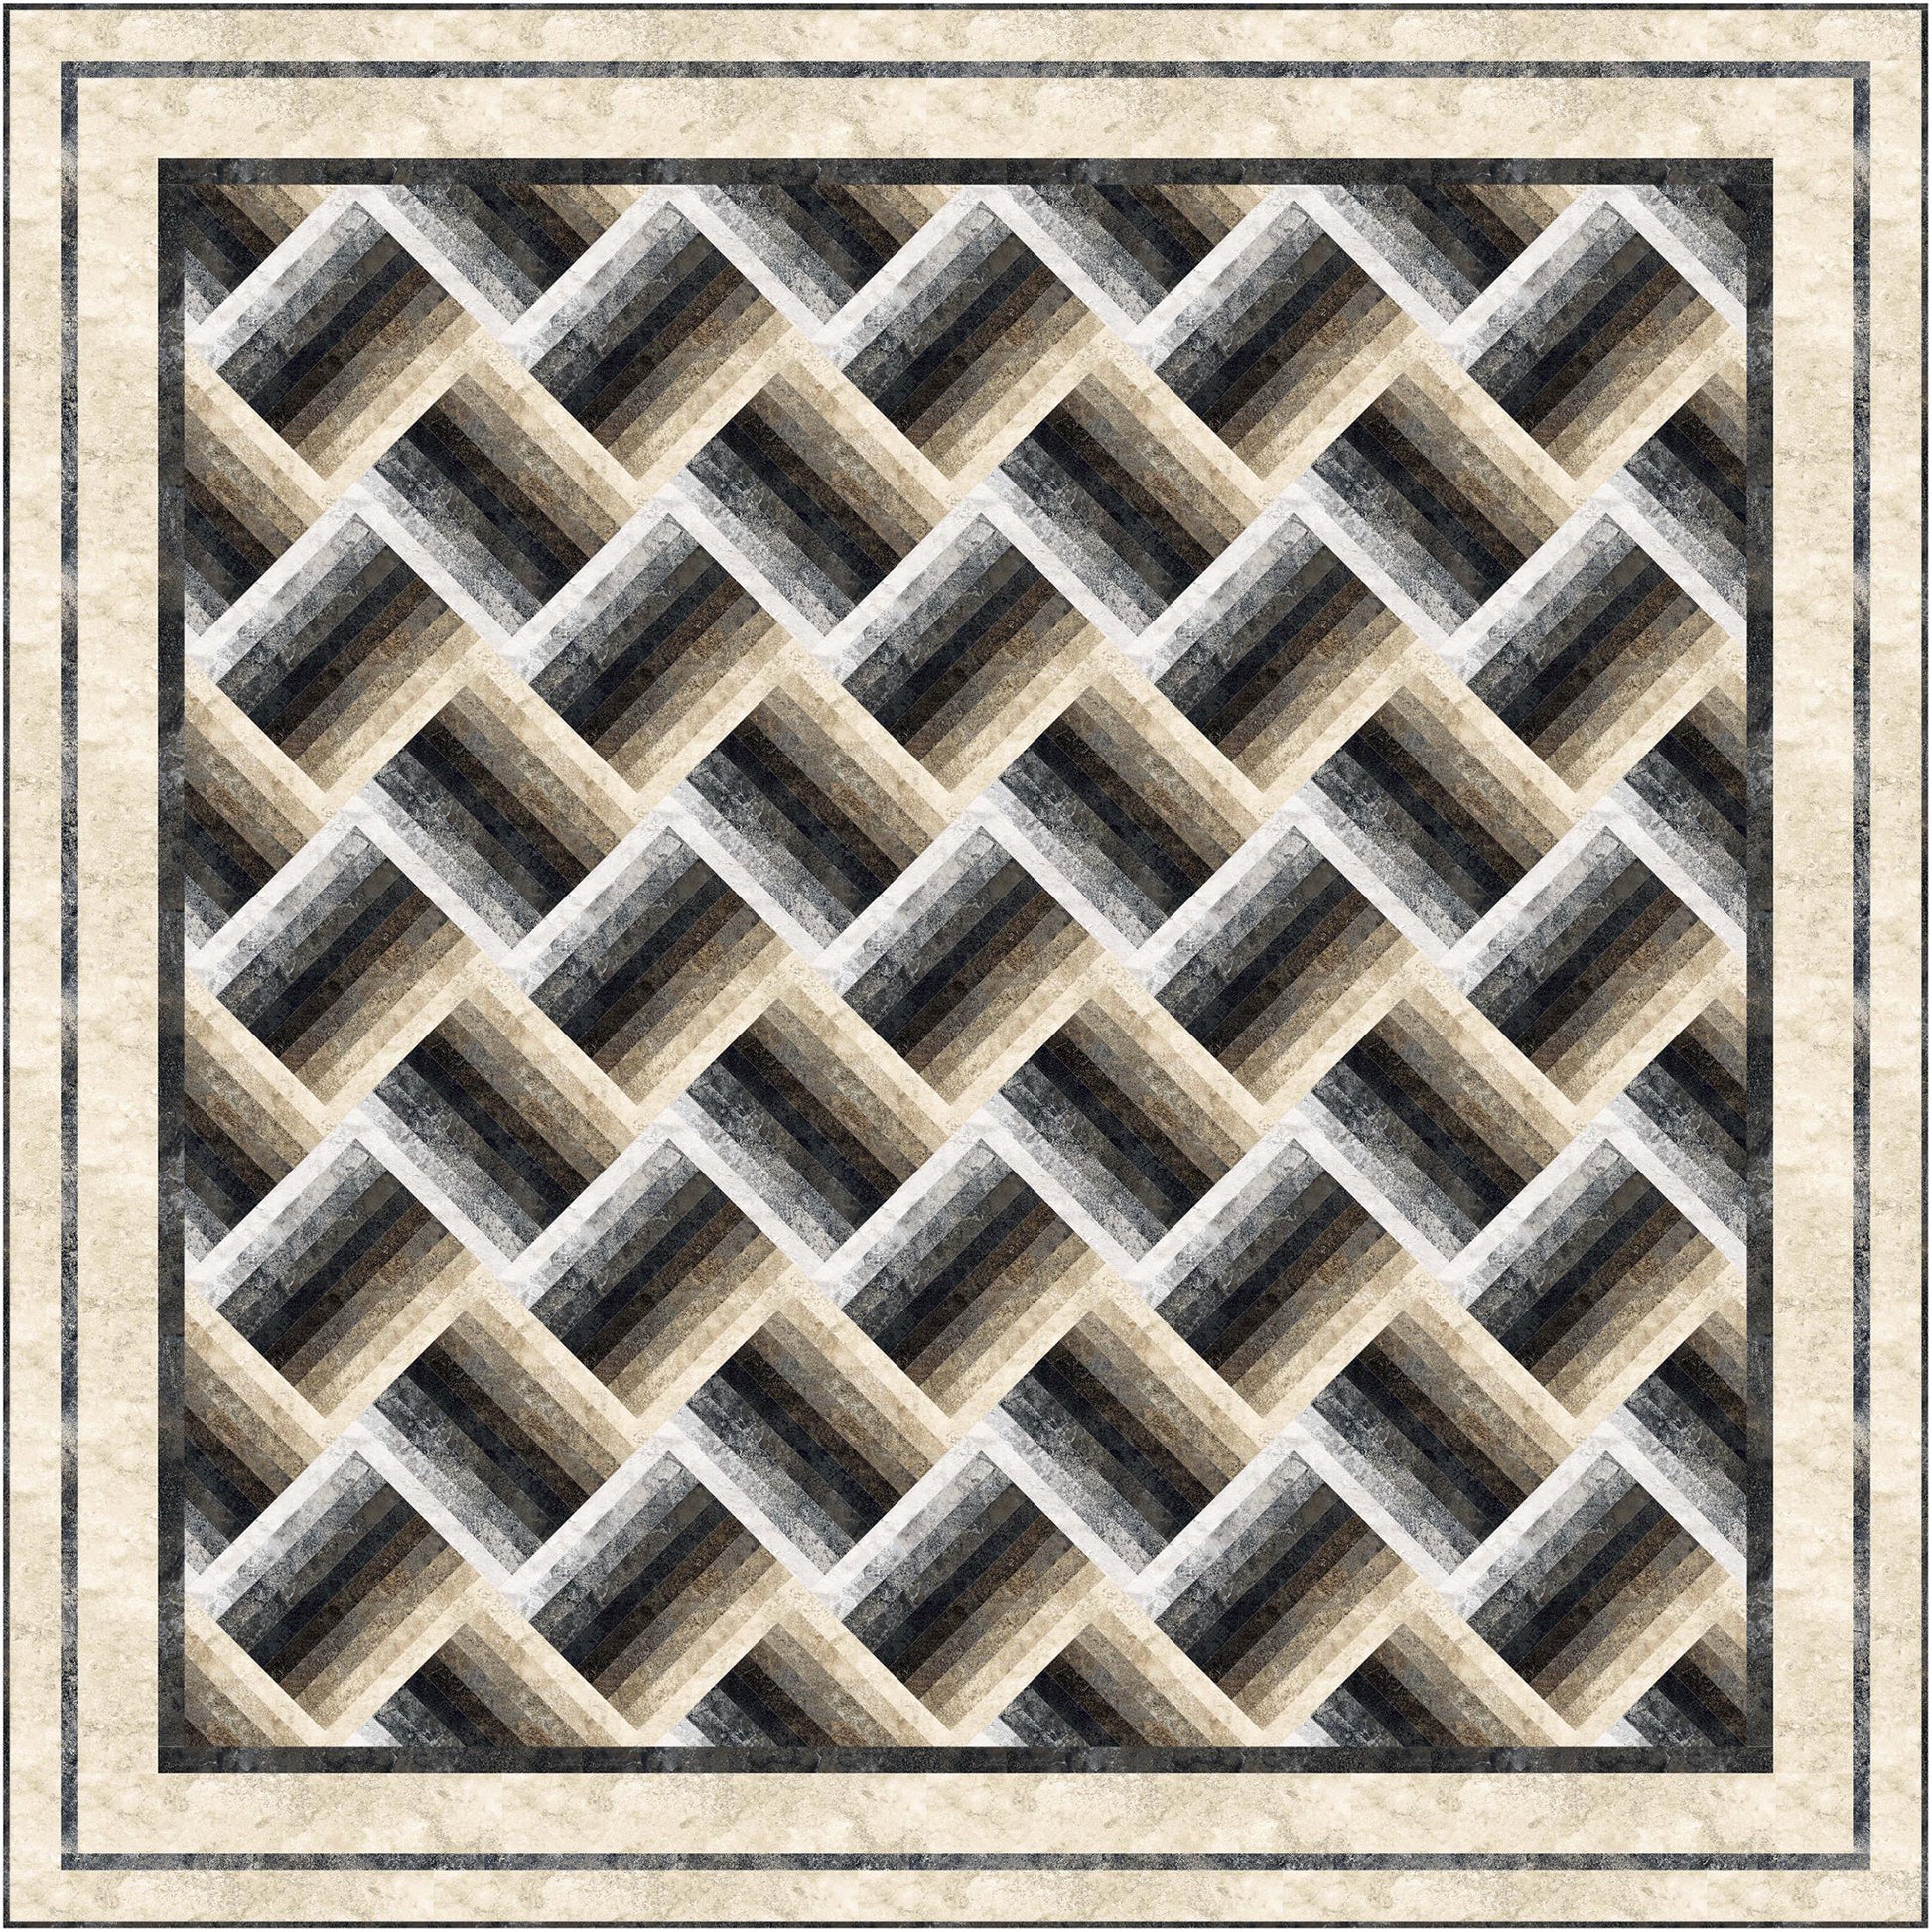 Elegant browns and tans geometric pattern quilt looks a lot like a basket weave at an angle.